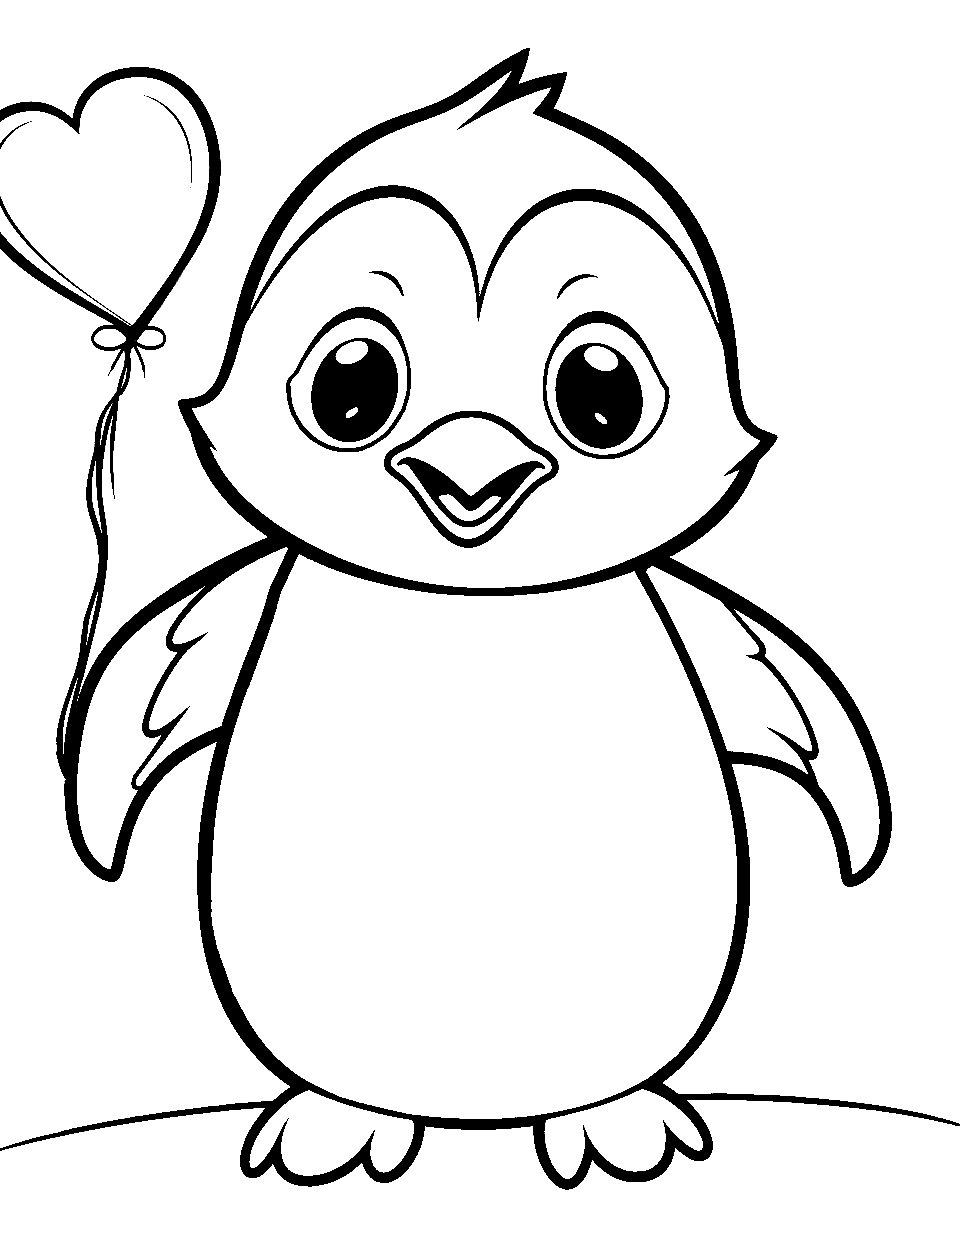 Valentine's Day Penguin Coloring Page - A penguin holding a heart-shaped balloon with love in its eyes.